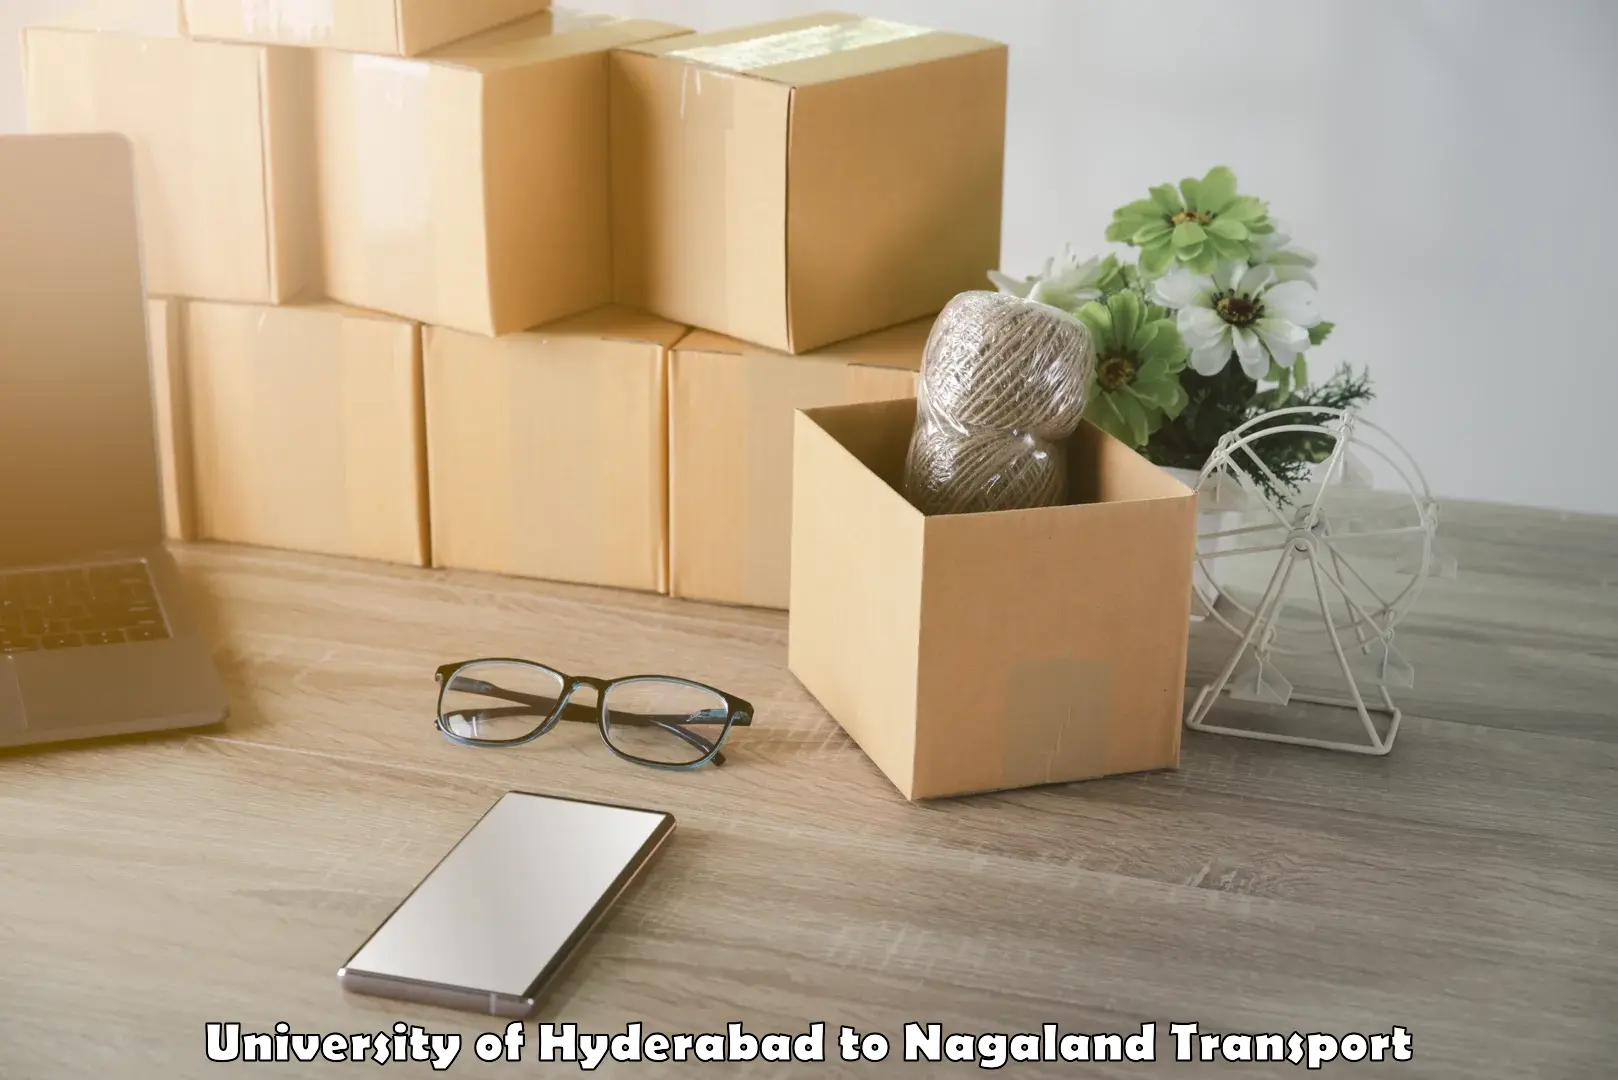 Pick up transport service in University of Hyderabad to Nagaland